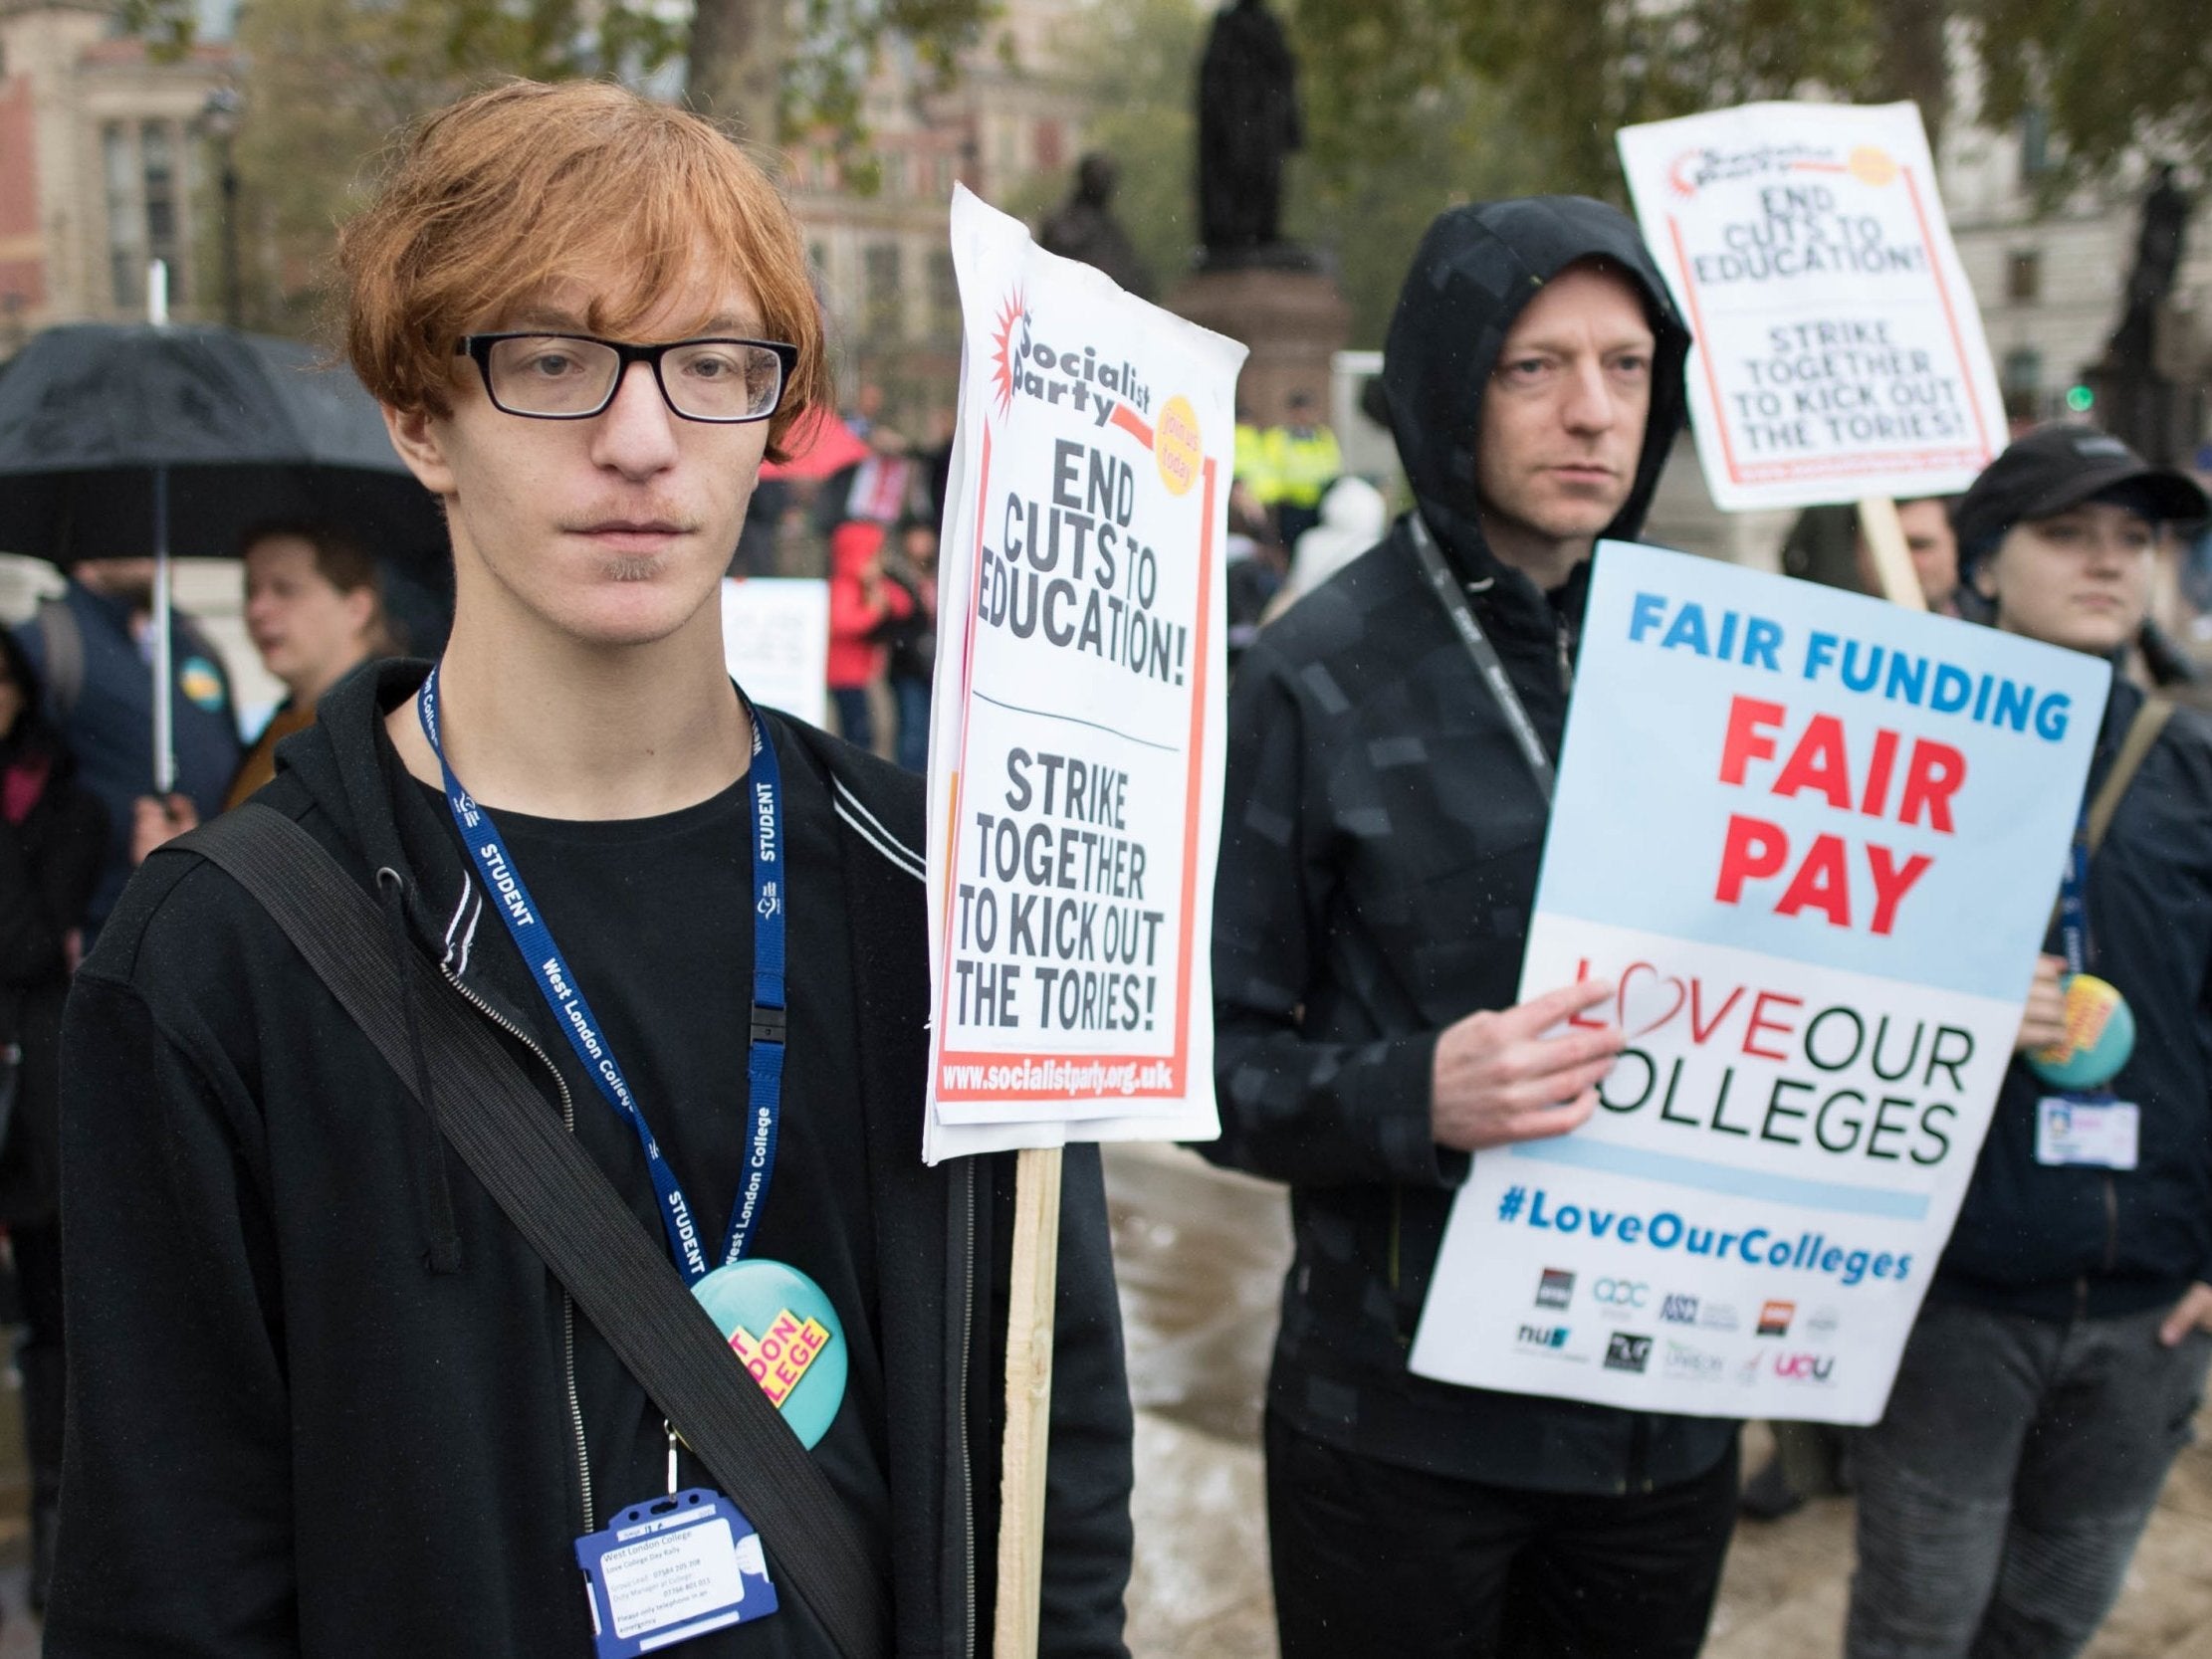 College students and principals march on Westminster last year over funding cuts